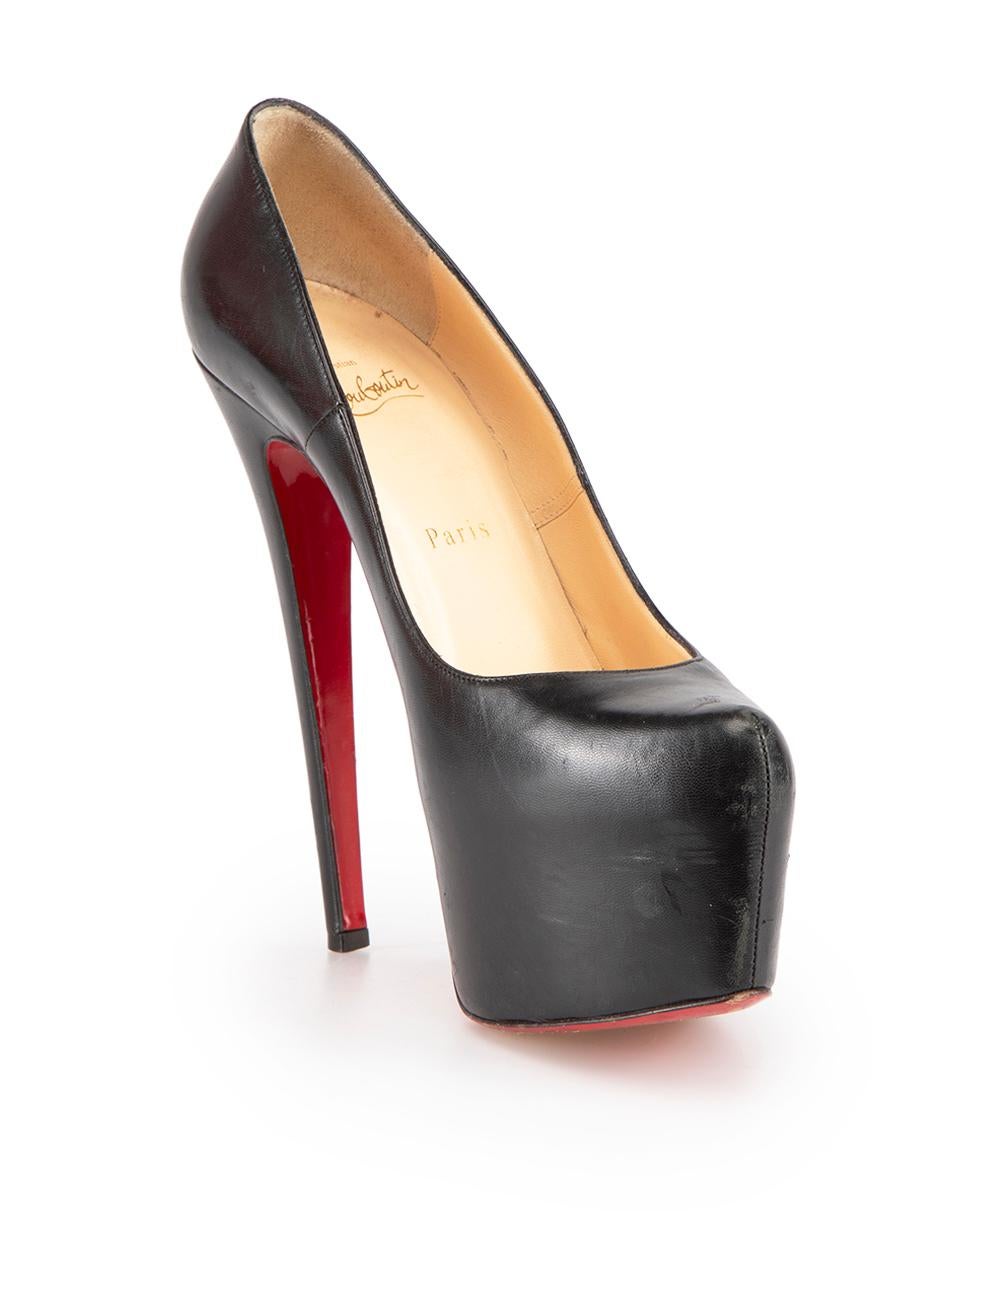 CONDITION is Good. General wear to heels is evident. Moderate signs of wear to overall leather where abrasion, scratches and indents is visible on this used Christian Louboutin designer resale item.

Details
Dolly
Black
Leather
Heels
Platform
Point